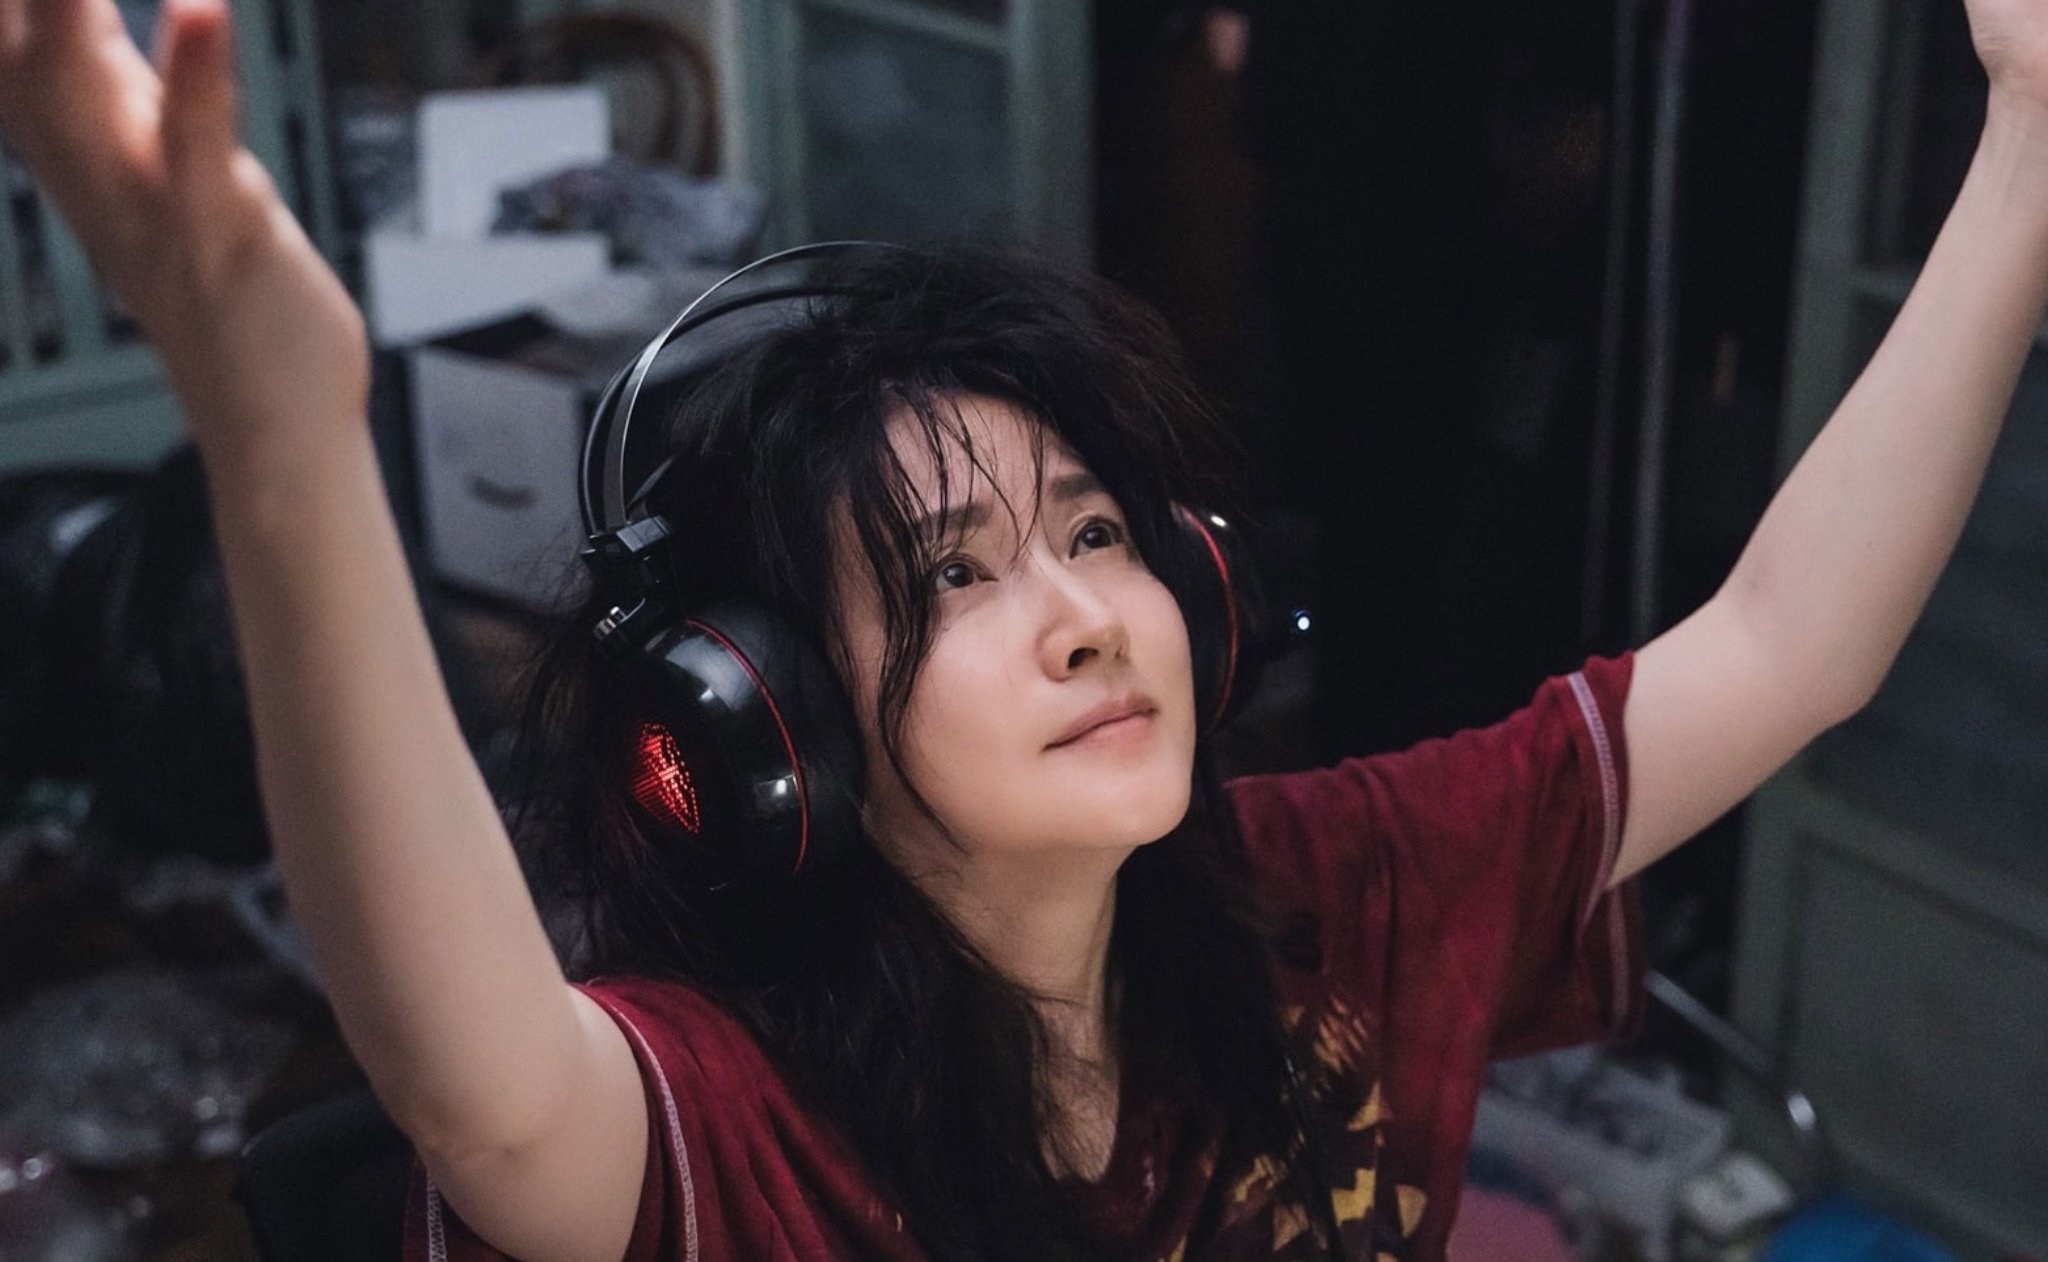 Lee Young-Ae as Koo Kyung-Yi for 'Inspector Koo' K-drama in red shirt, gaming headphones and raising her arms.